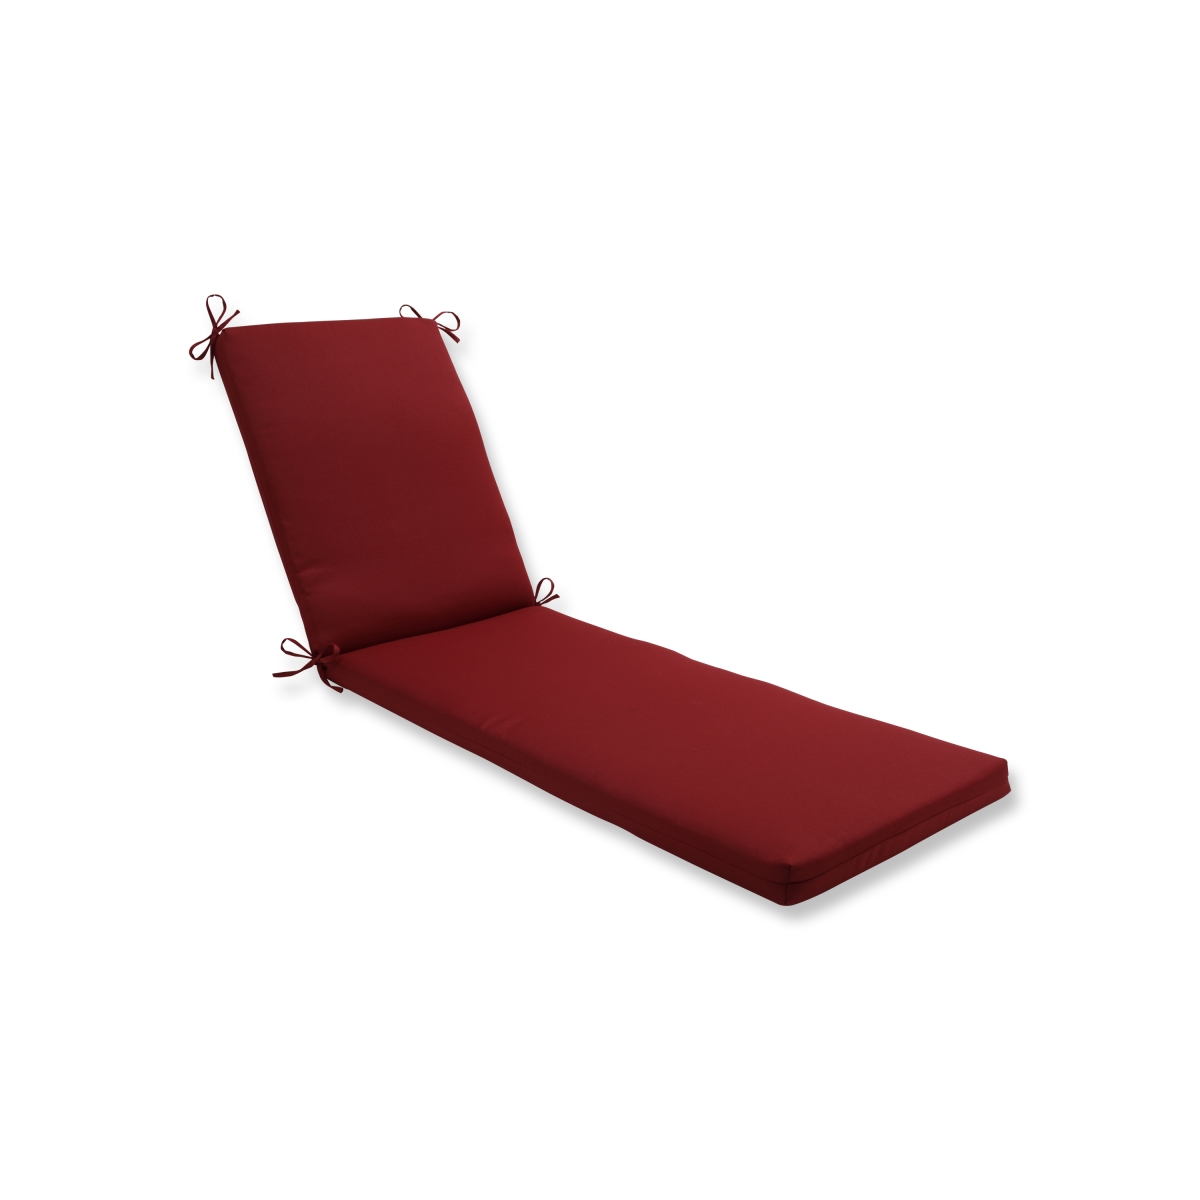 80 X 23 X 3 In. Outdoor & Indoor Pompeii Chaise Lounge Cushion, Red